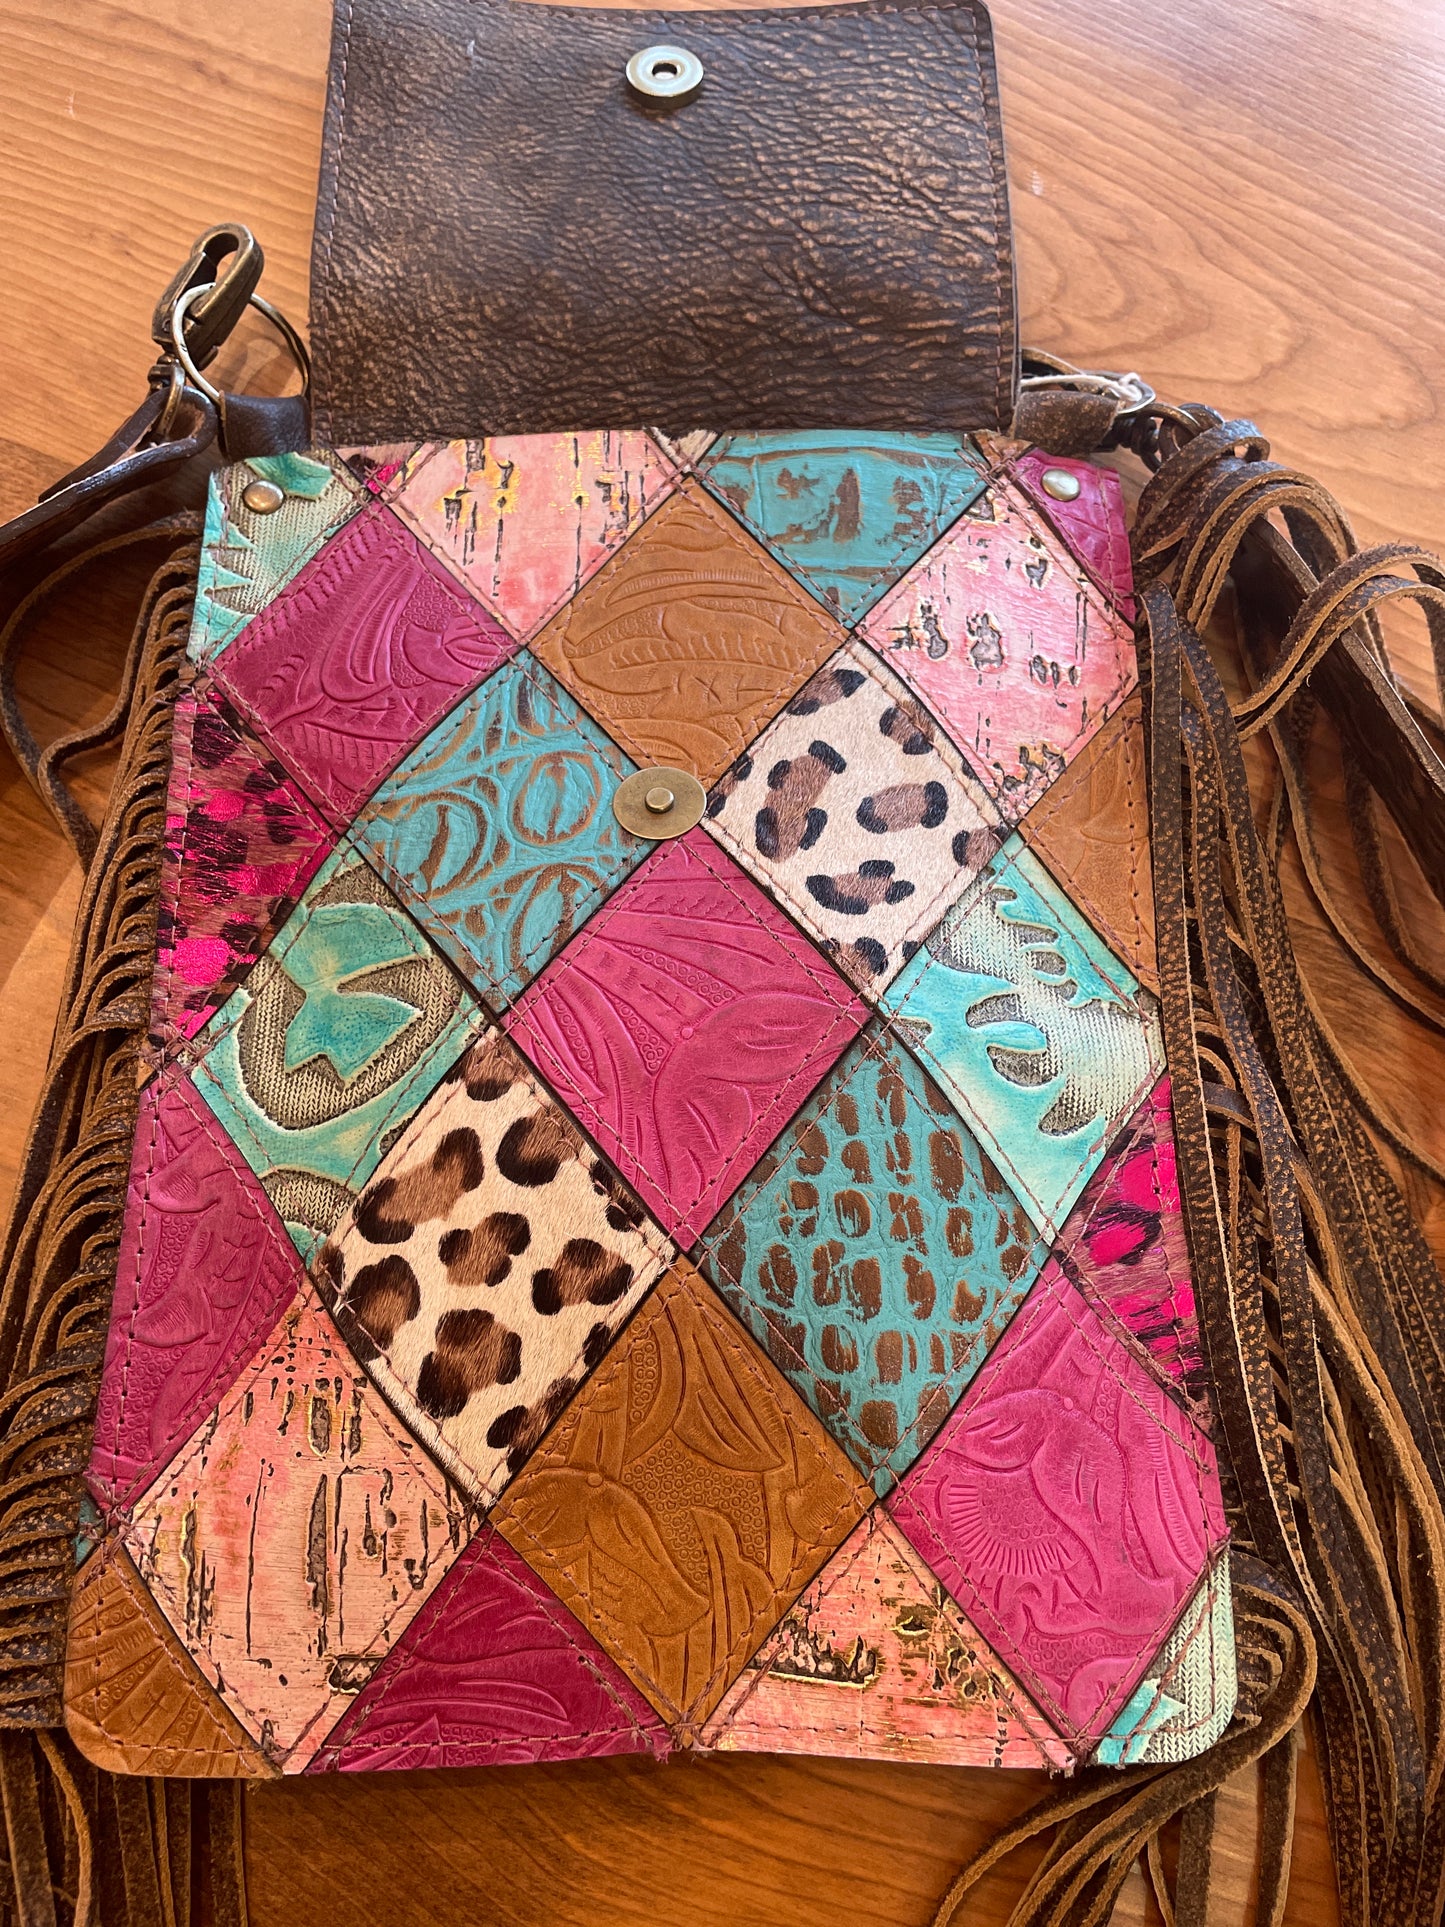 Gorgeous Colors on this all leather upcycled bag 💕